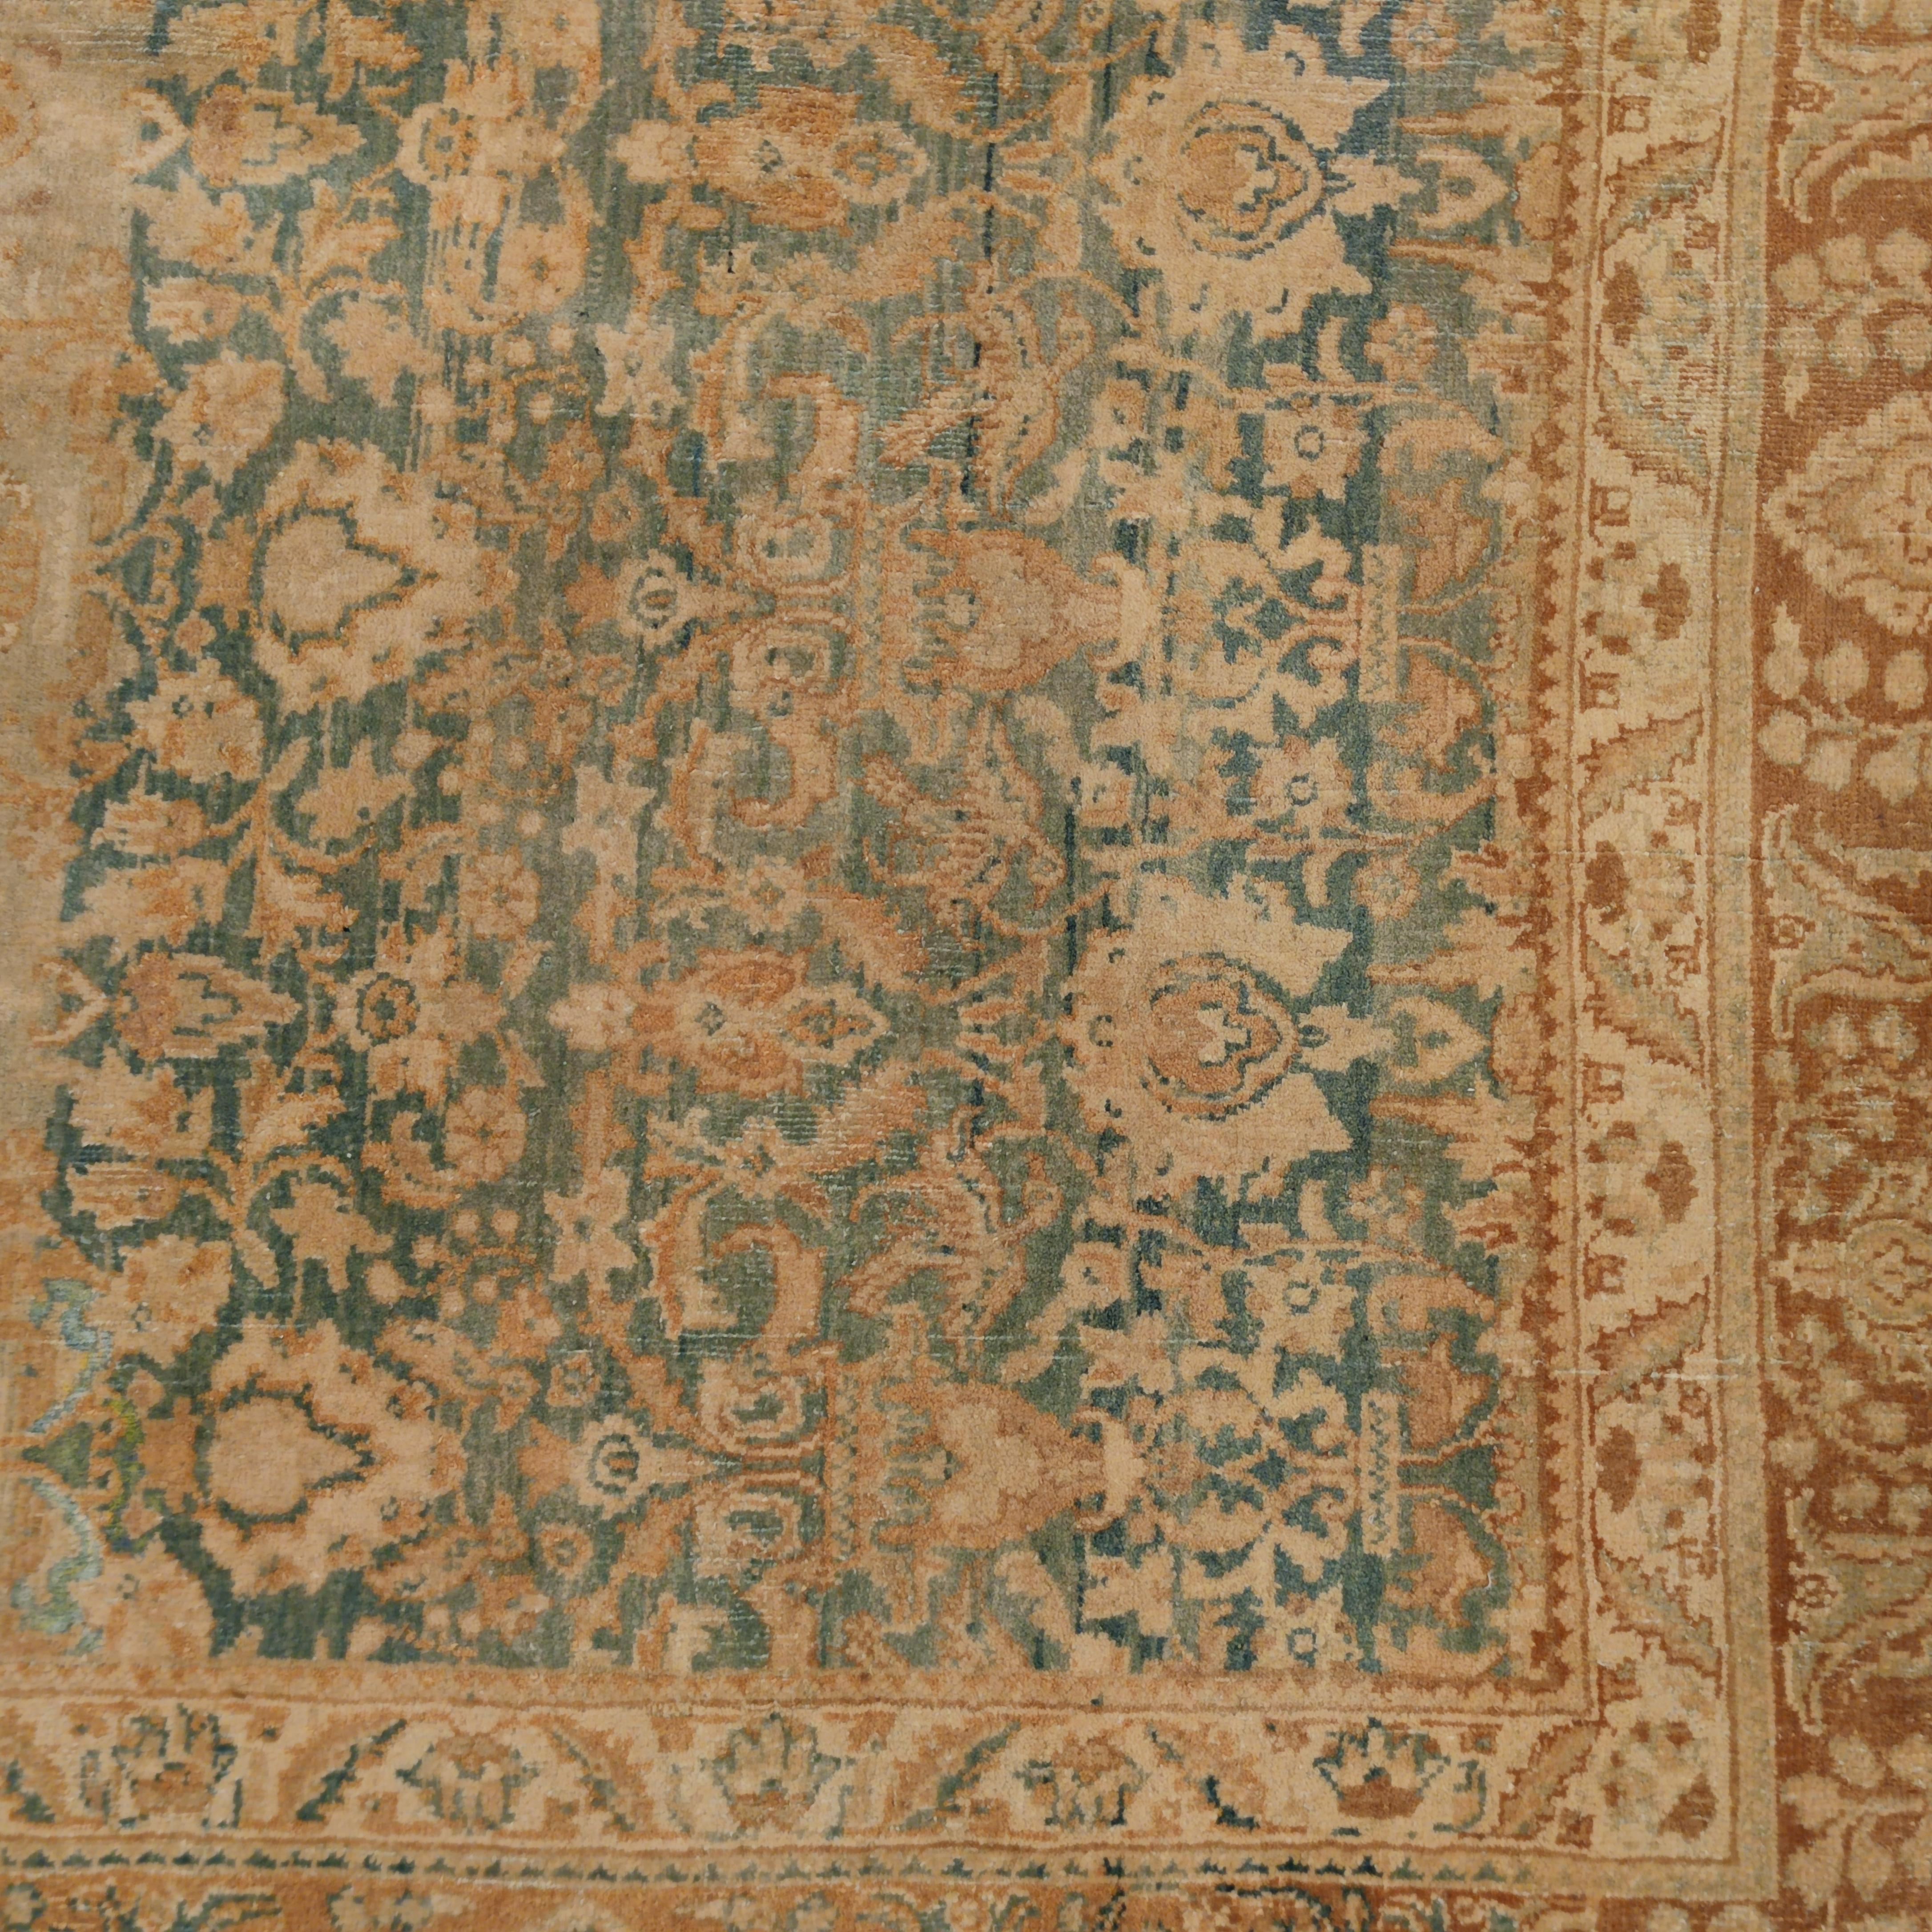 Hand-Knotted Antique Teal Blue Agra Rug with All-Over Pattern